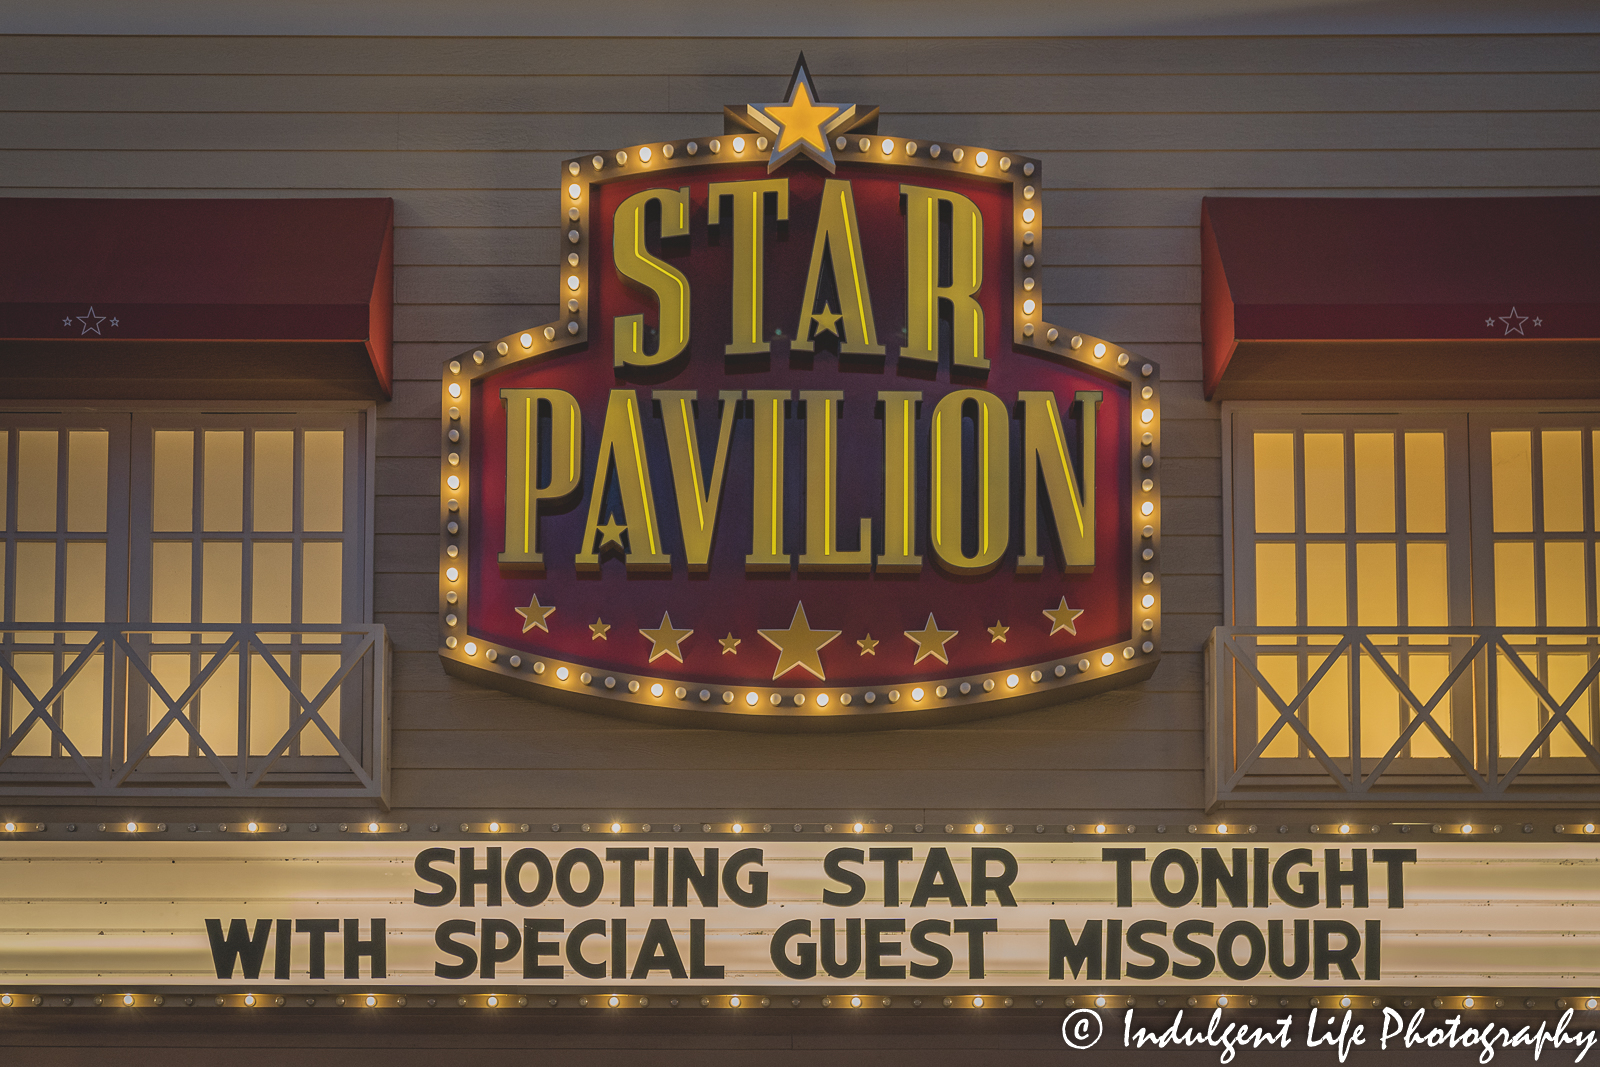 Star Pavilion marquee at Ameristar Casino in Kansas City, MO featuring Shooting Star with Missouri the band on April 9, 2022.